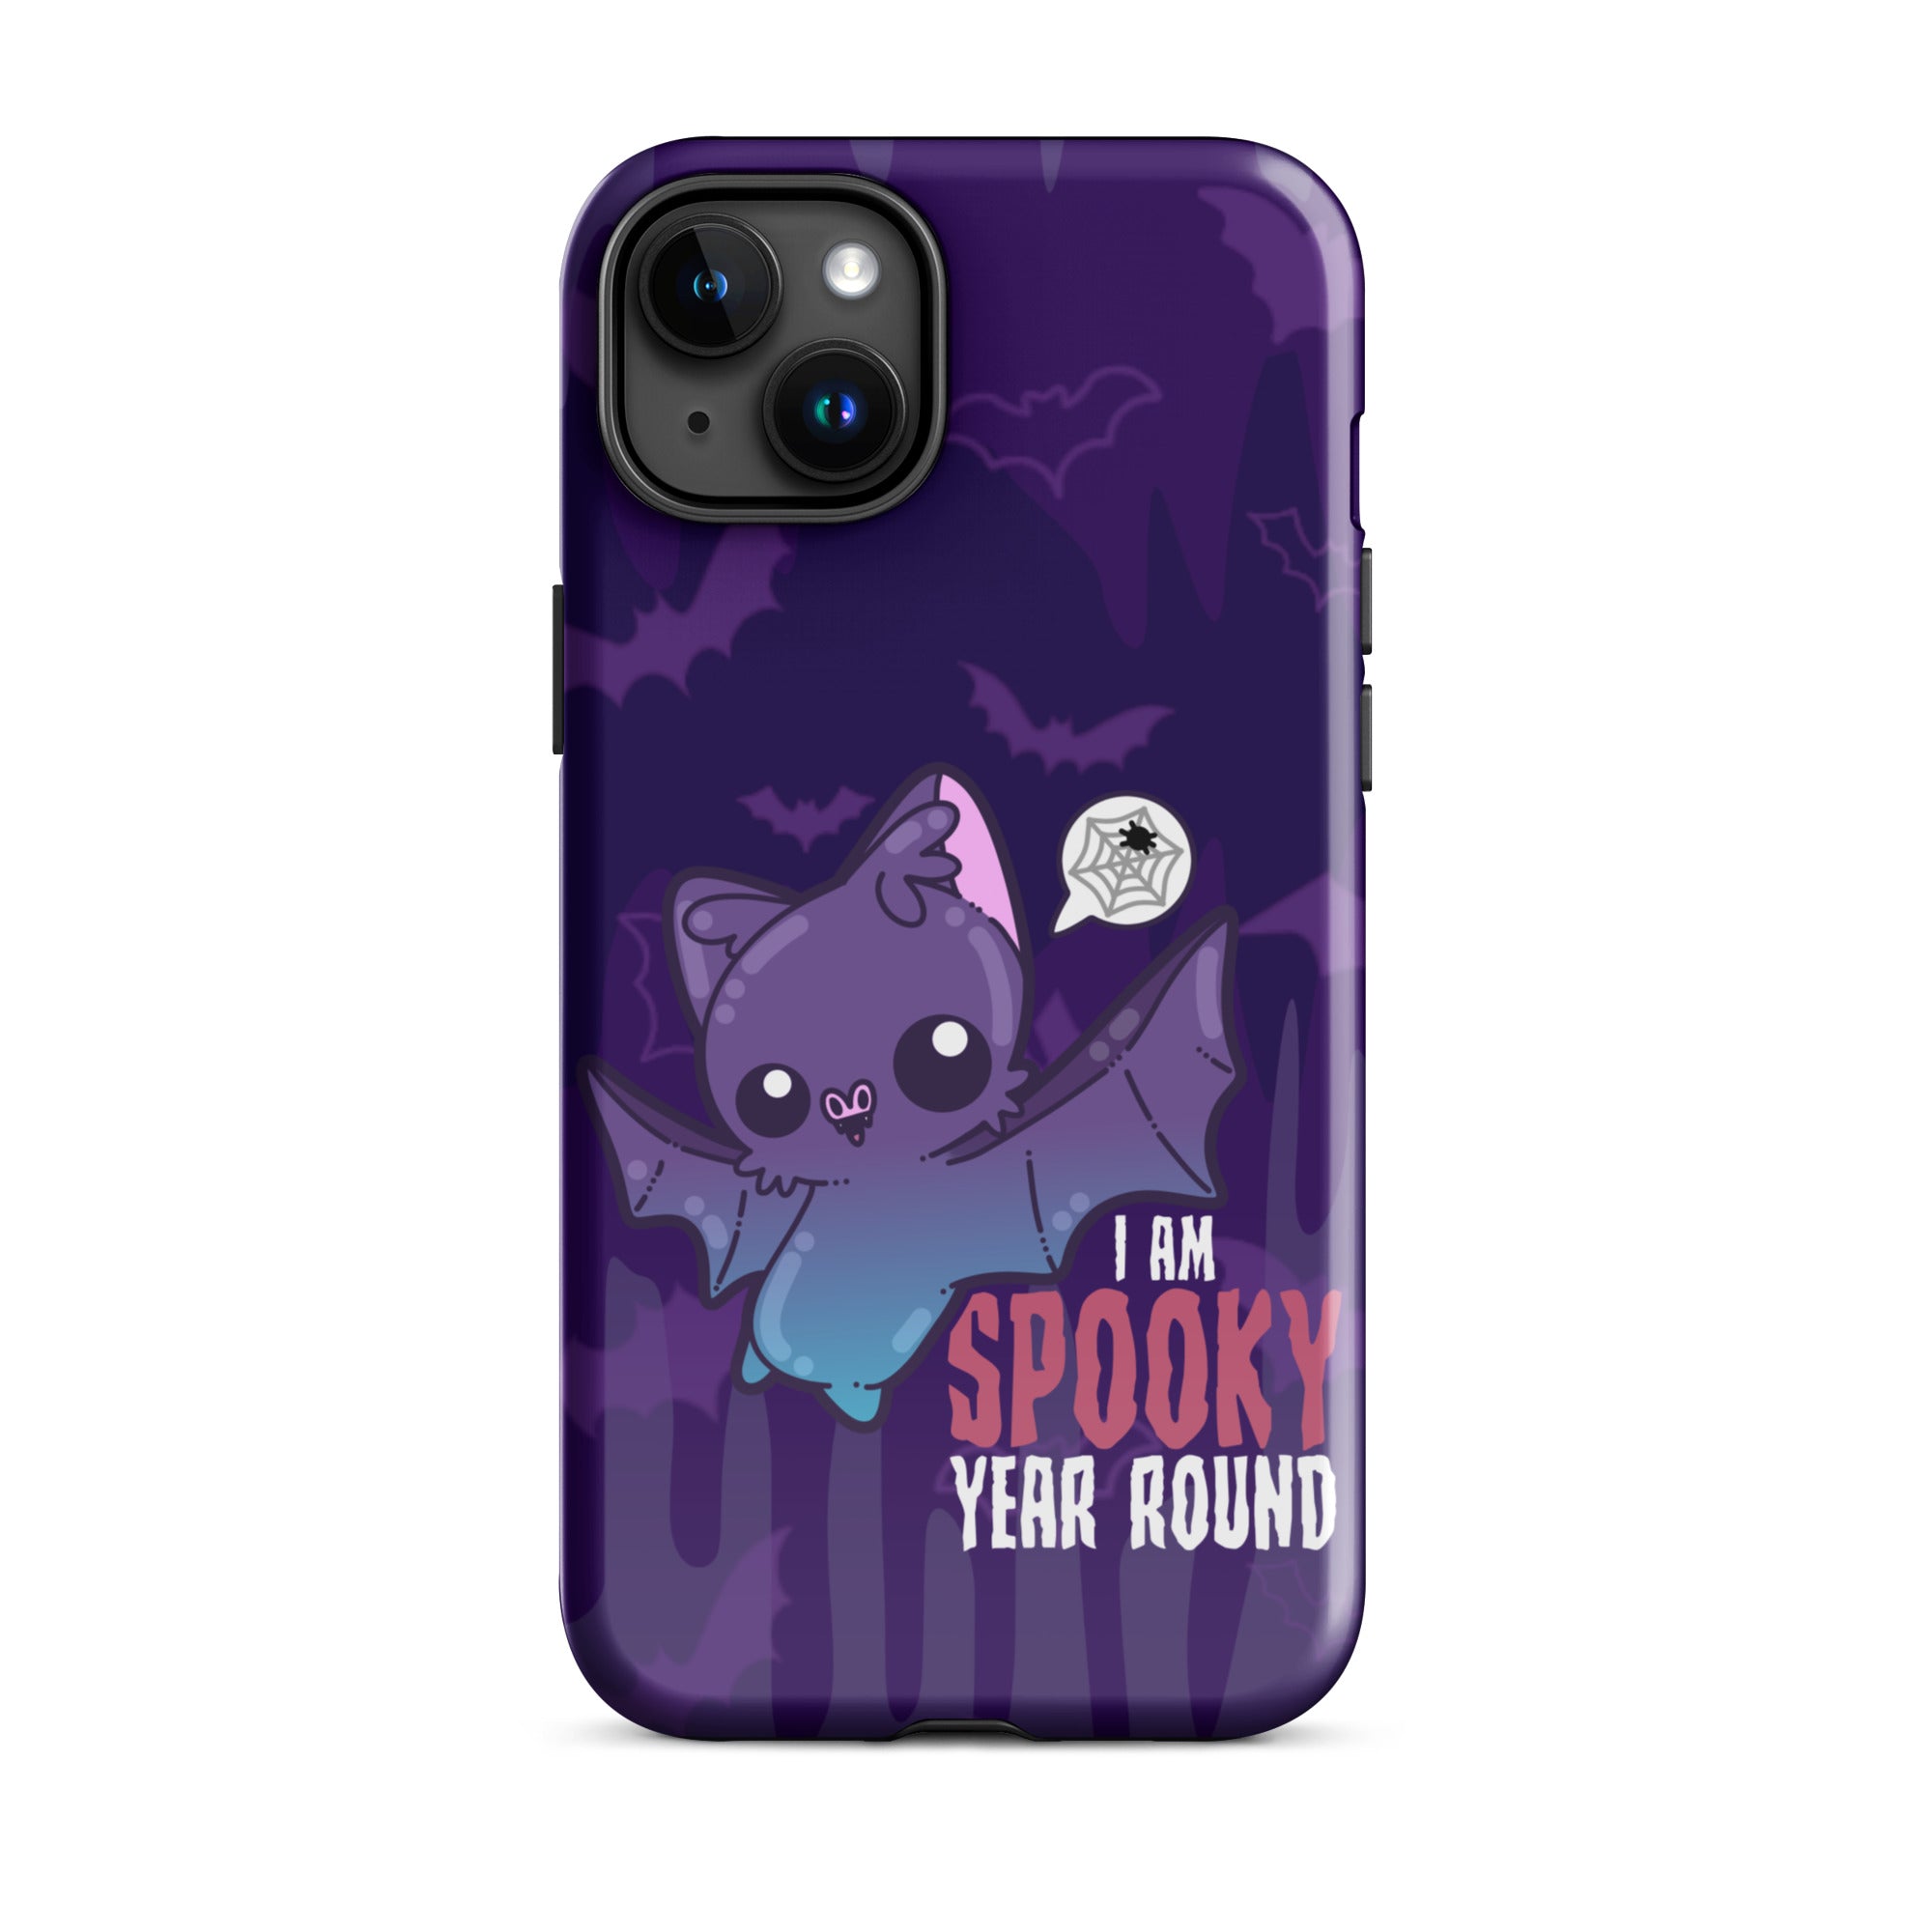 I AM SPOOKY YEAR ROUND W/BACKGROUND - Tough Case for iPhone®